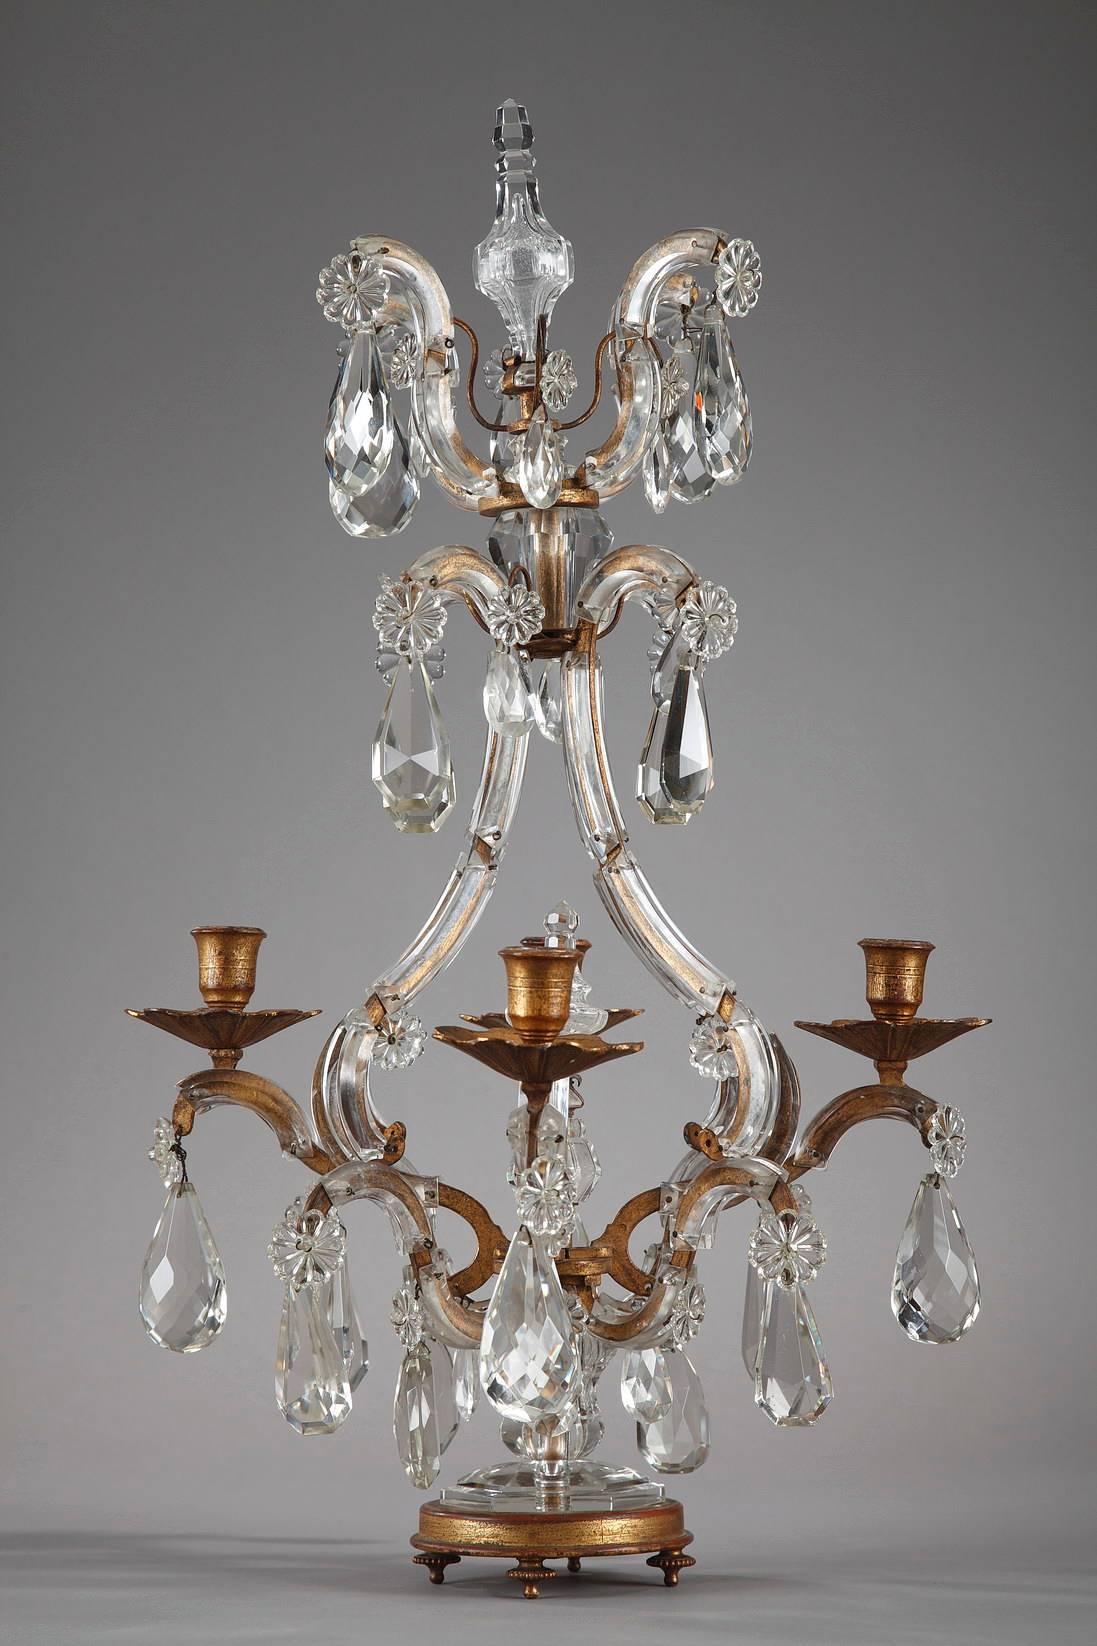 Pair of gilt bronze and crystal candelabra with four curved arms. The arms are sheathed in crystal and are decorated with teardrop and rosette crystal pendants. The central barrel is topped with a decorative dagger, and the ensemble rests on a